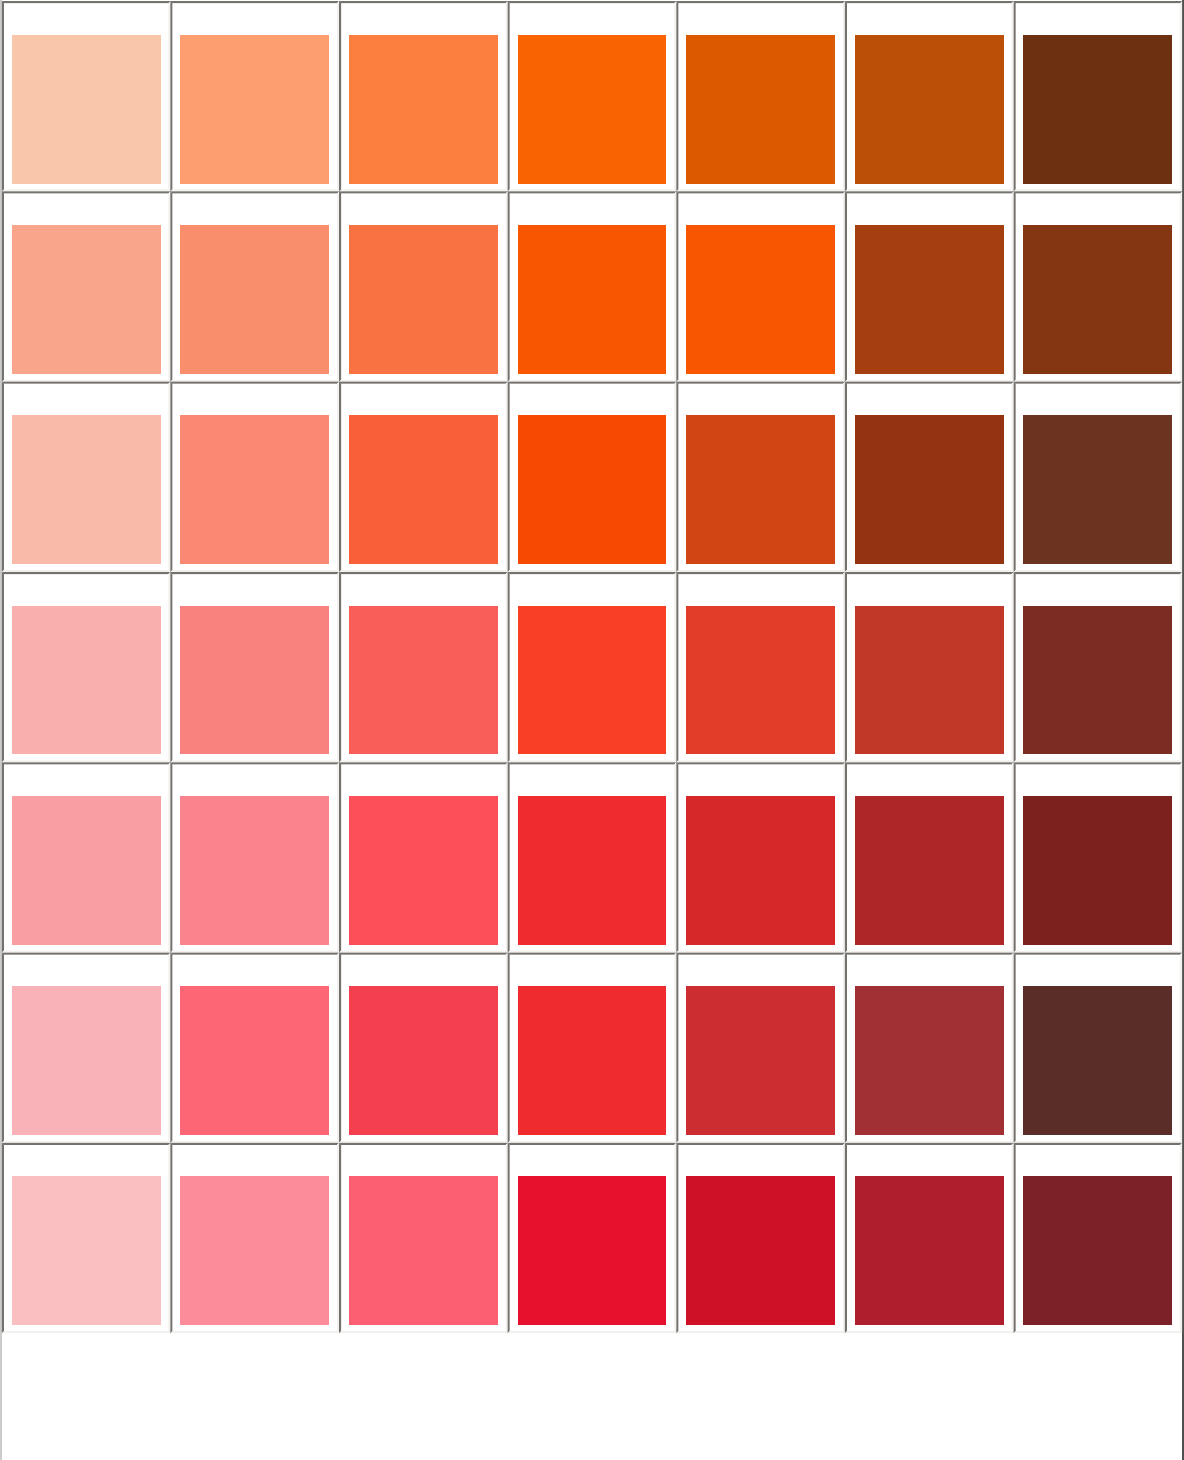 Pantone Matching System Color Chart.